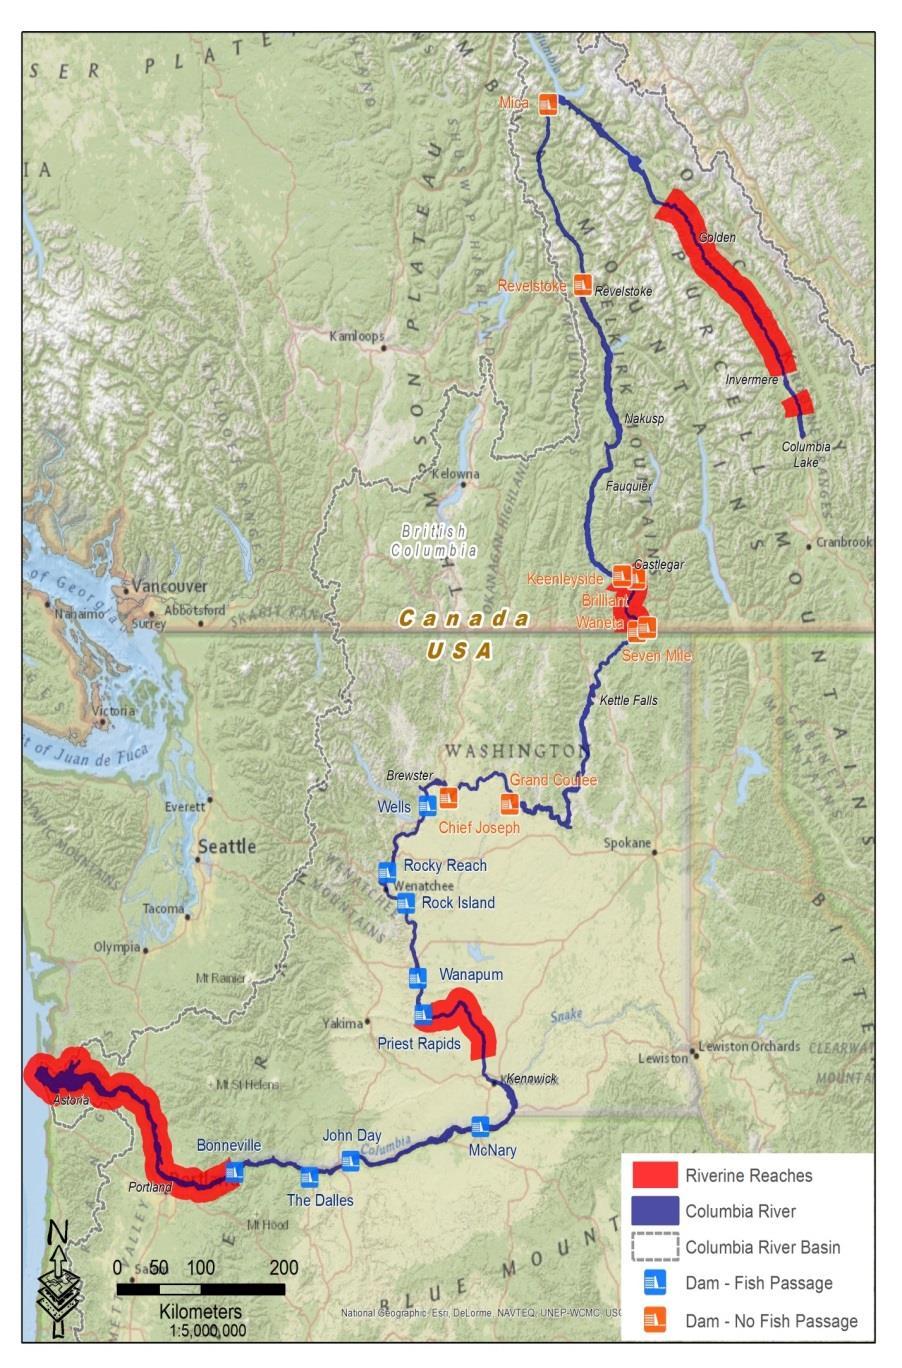 KNC implementation of Phase I plan Efforts focused on Transboundary Reach 2013-2016: Donor stock selection of Chinook Salmon 2016-2017: Spawning habitat